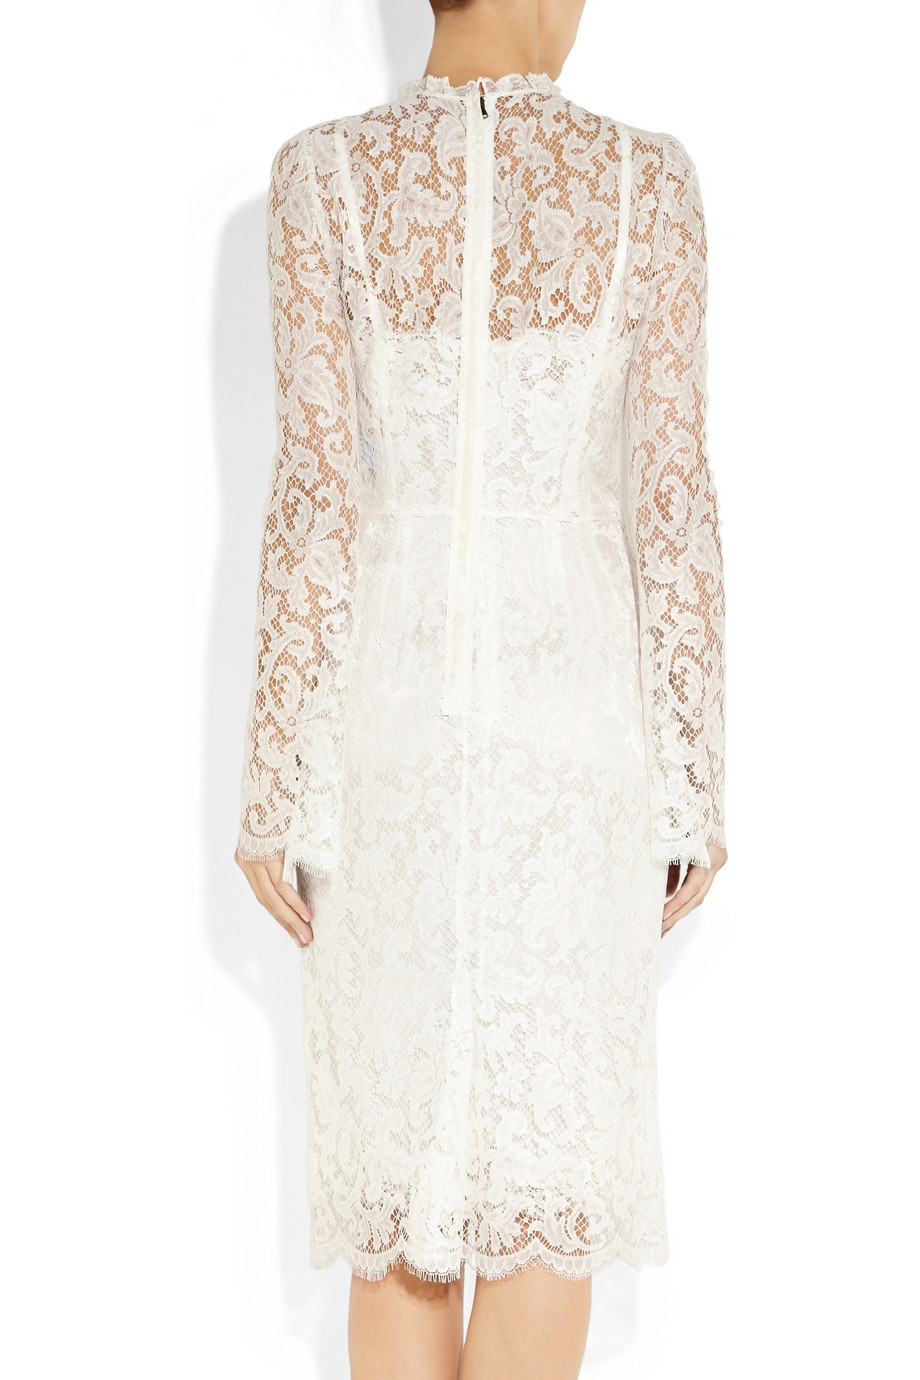 Dolce & Gabbana Scalloped Lace Dress in White - Lyst